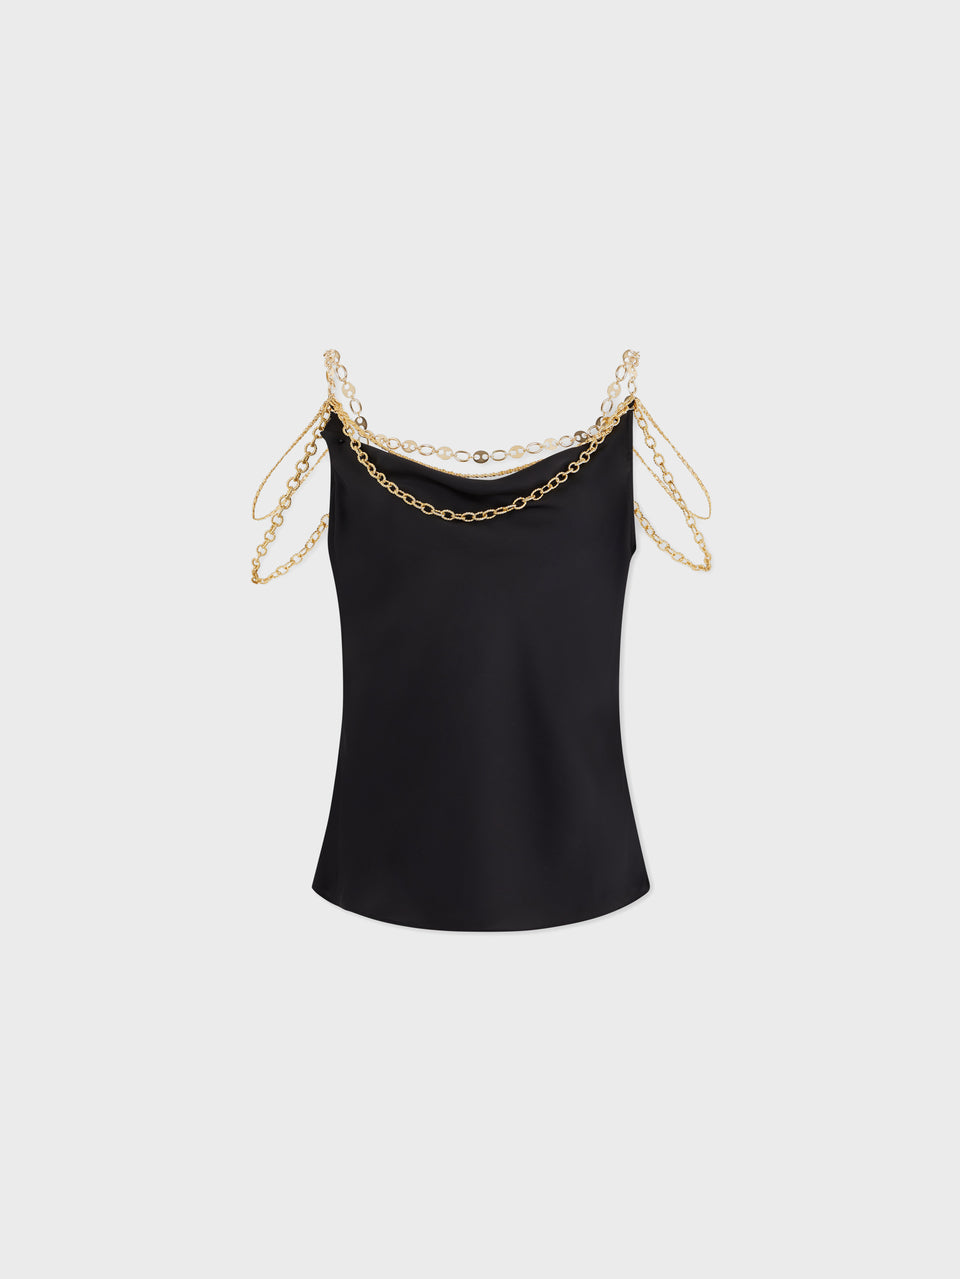 Black top embellished with "Eight" signature chain